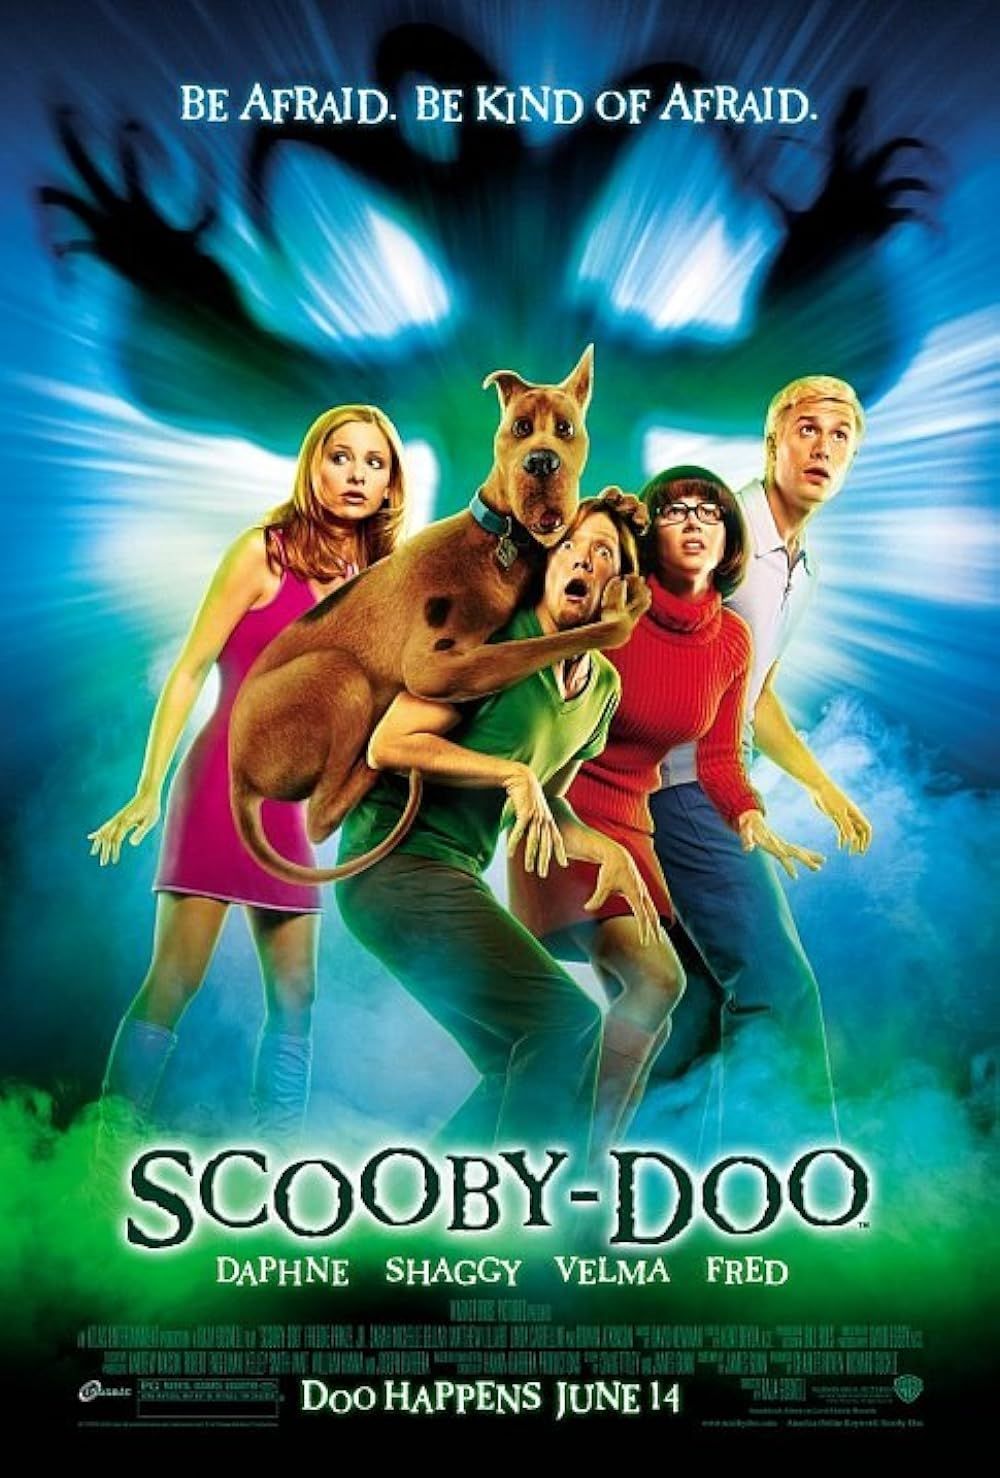 Daphne, Scooby-Doo, Shaggy, Velma and Fred on the Scooby-Doo 2002 movie poster